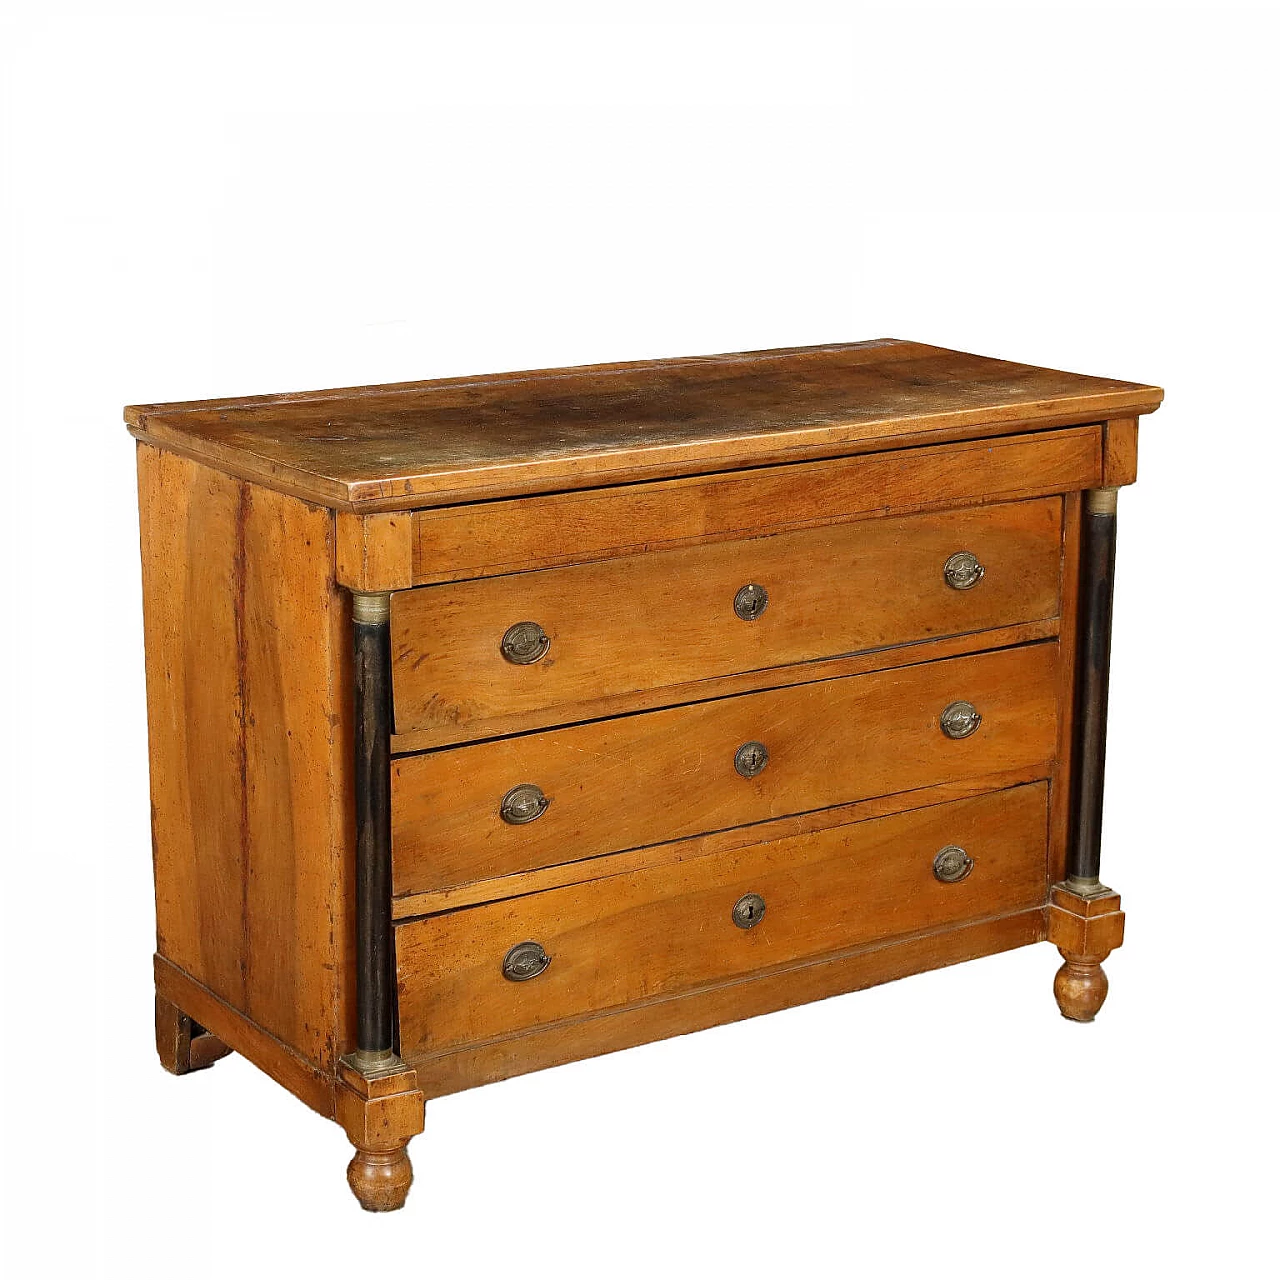 Emilian Empire chest of drawers in walnut, 19th century 1